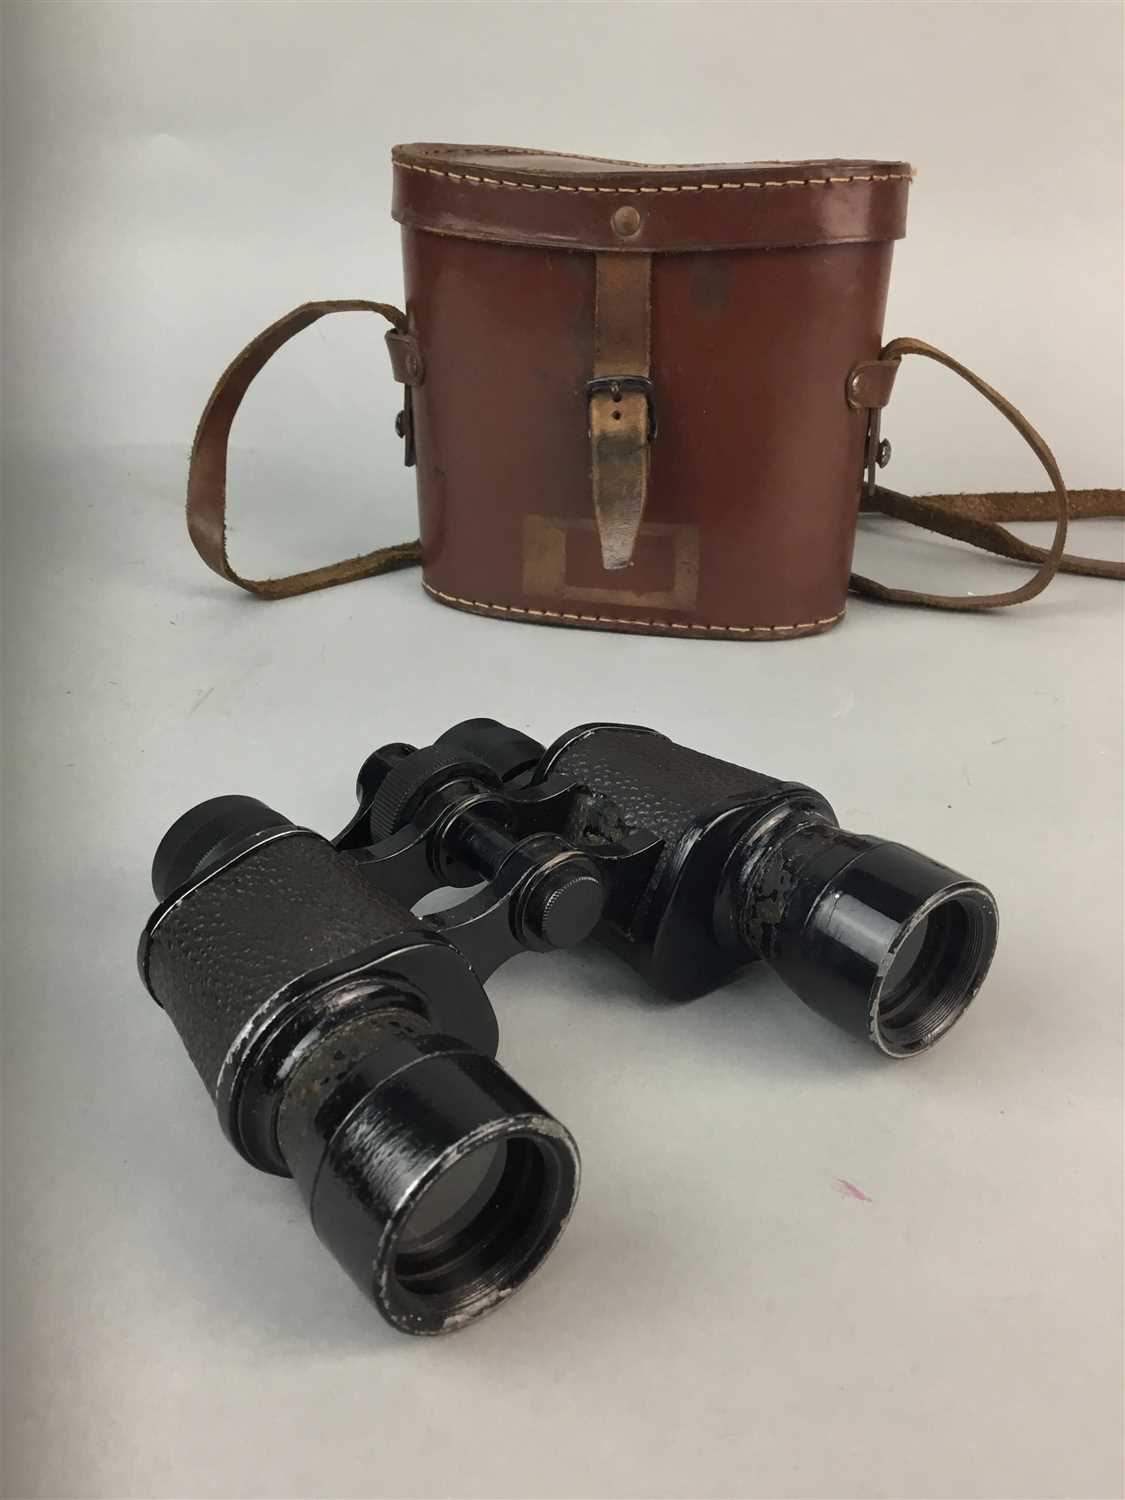 Lot 20 - A PAIR OF EARLY 20TH CENTURY BINOCULARS IN LEATHER CASE AND GENT'S TOILET SET